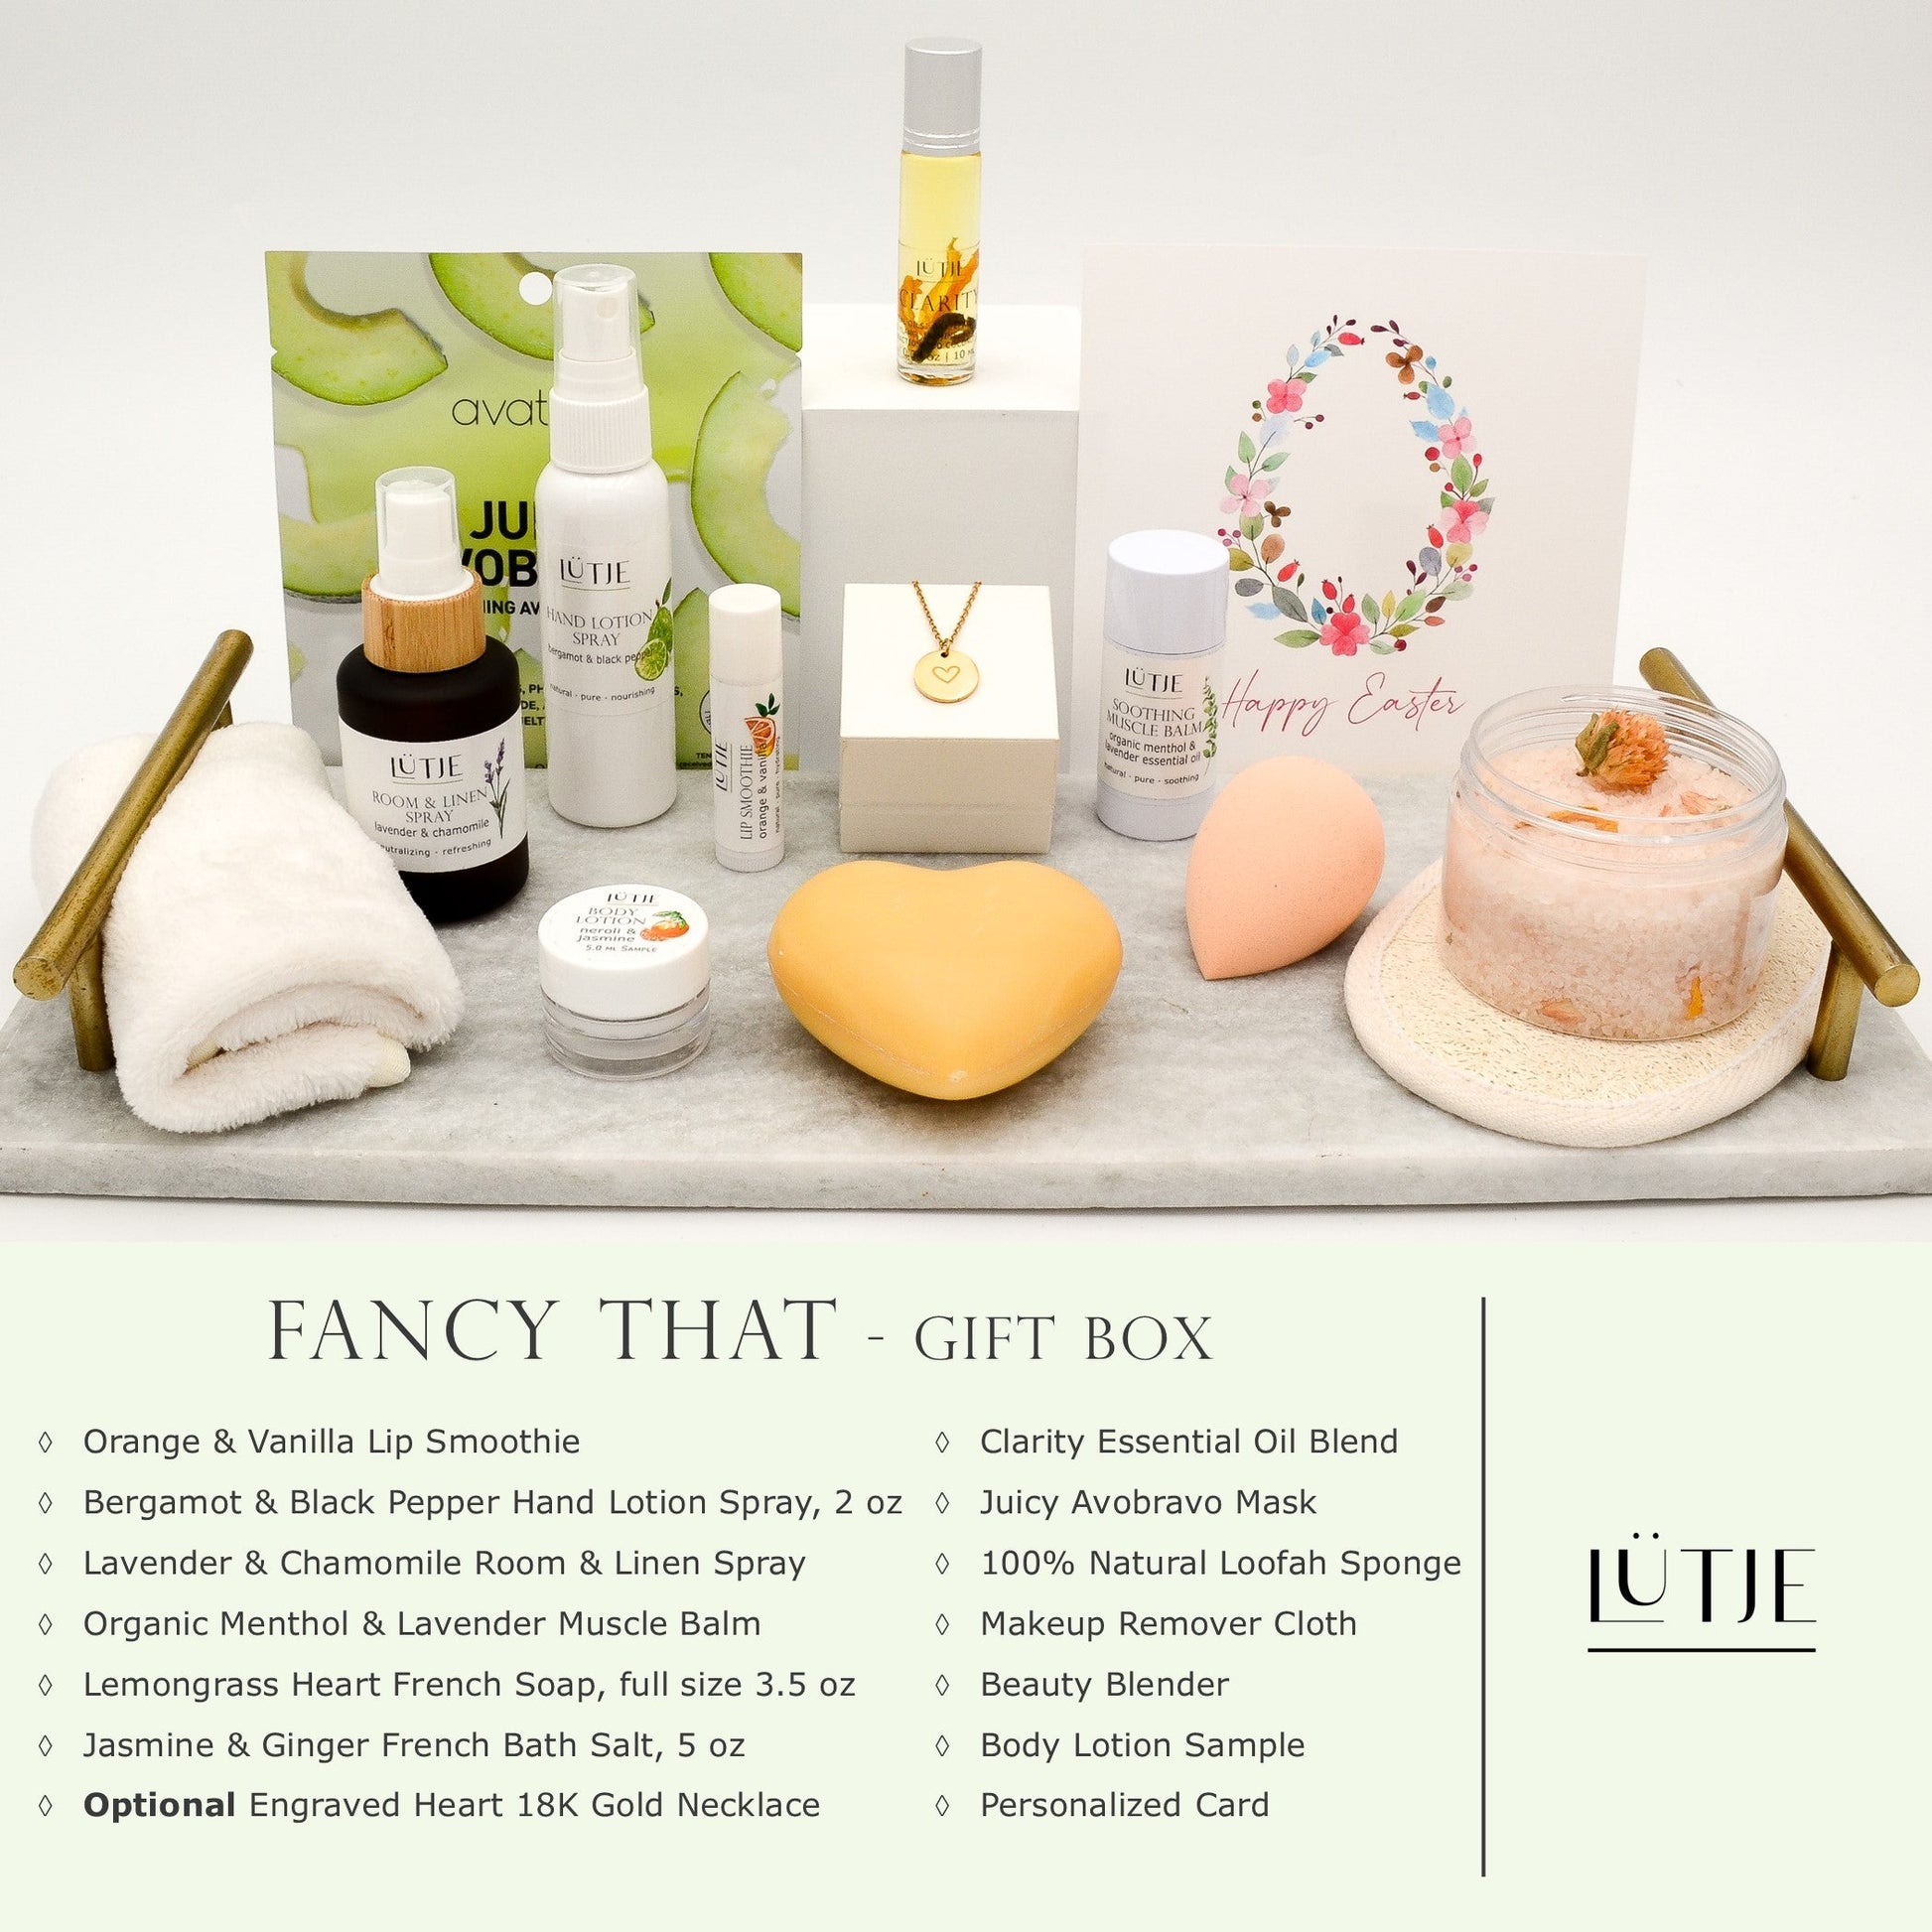 Fancy That Gift Box for women, BFF, wife, daughter, sister, mom, or grandma, includes Bergamot & Black Pepper hand lotion spray, essential oil, lip balm, soothing muscle balm, Lavender & Chamomile room & linen spray, French soap, French bath salts, hydrating face mask, other bath, spa and self-care items, and optional 18K gold-plated necklace with engraved heart.